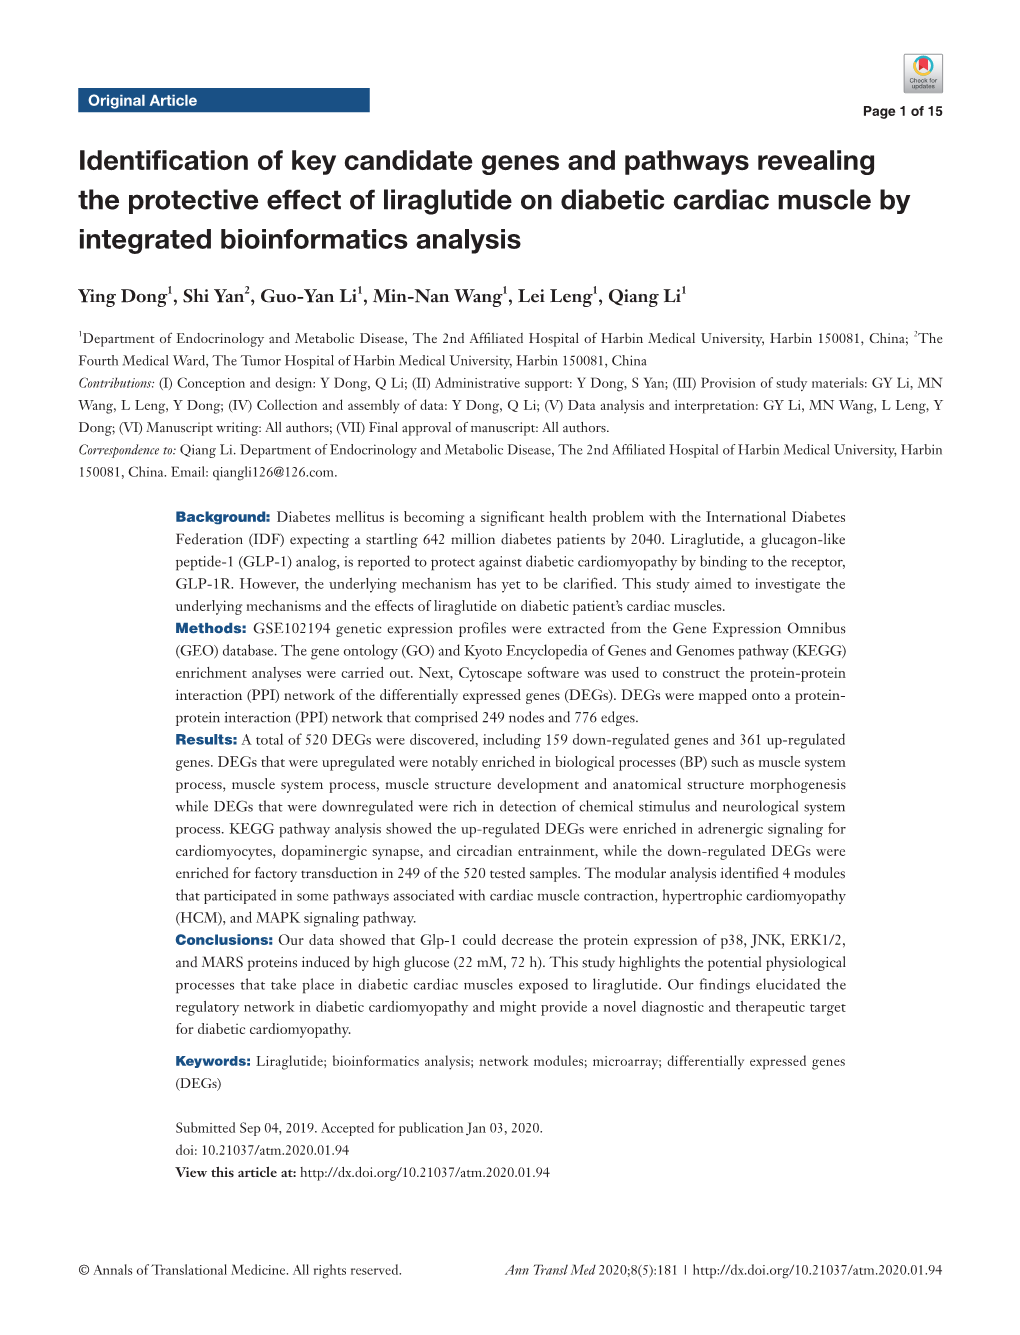 Identification of Key Candidate Genes and Pathways Revealing the Protective Effect of Liraglutide on Diabetic Cardiac Muscle by Integrated Bioinformatics Analysis